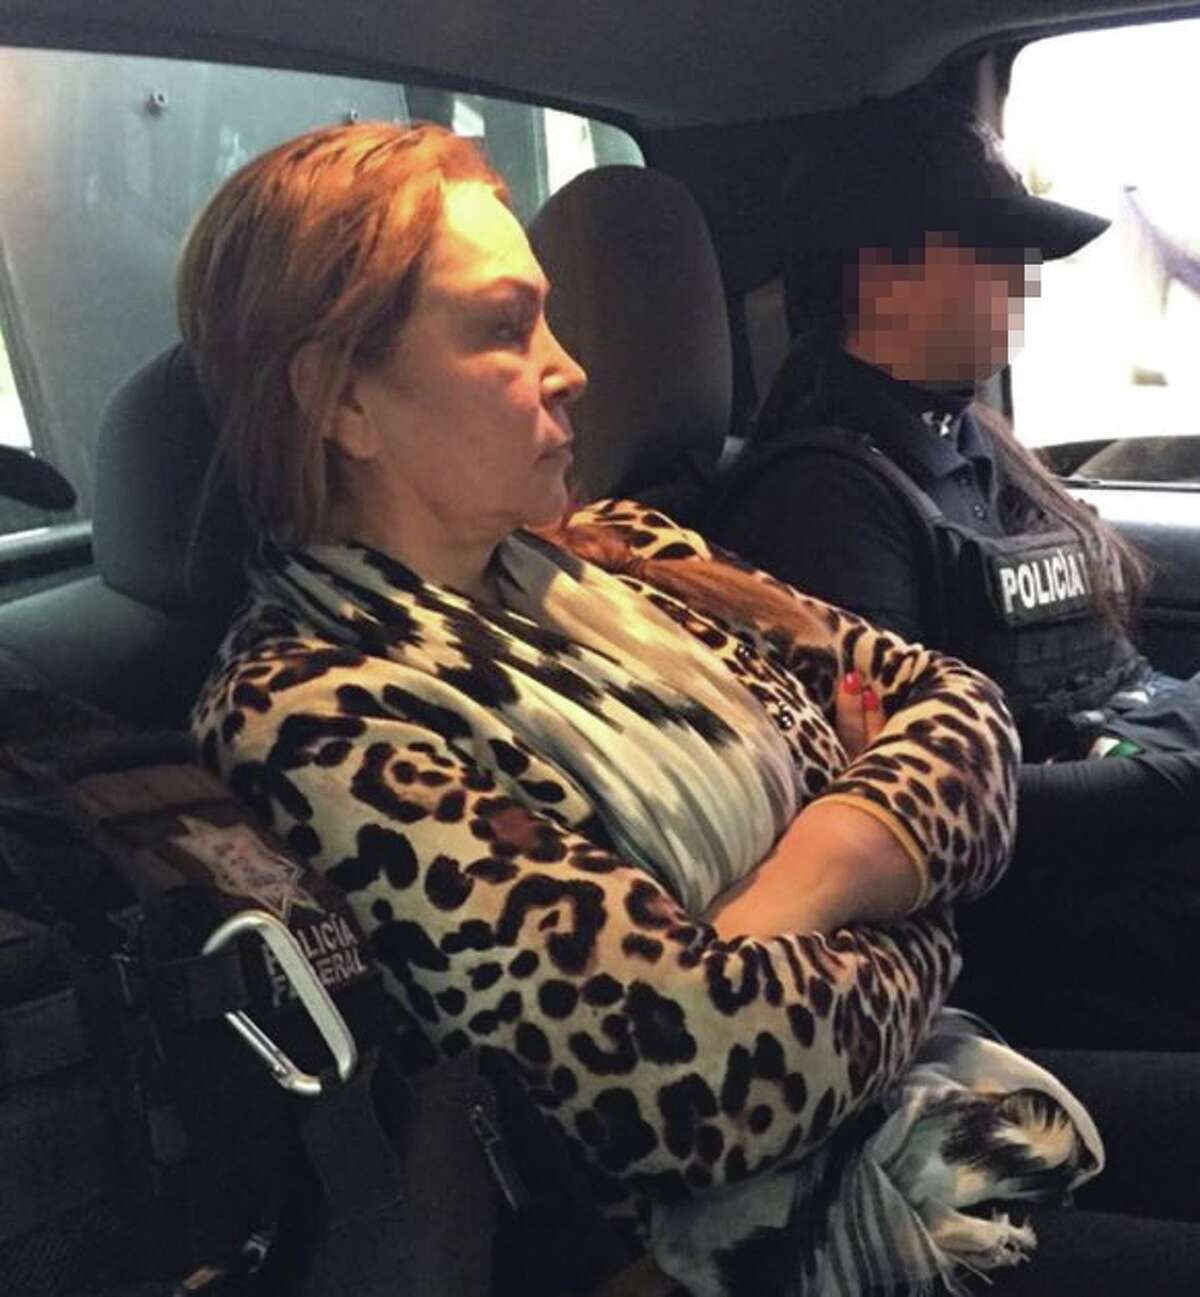 Mexican authorities announced the capture of Guadalupe Fernandez Valencia, 55, on Tuesday. Valenica, also known as "La Patrona," is accused of trafficking drugs and money for the Sinaloa cartel, headed by Joaquín "El Chapo" Guzmán.